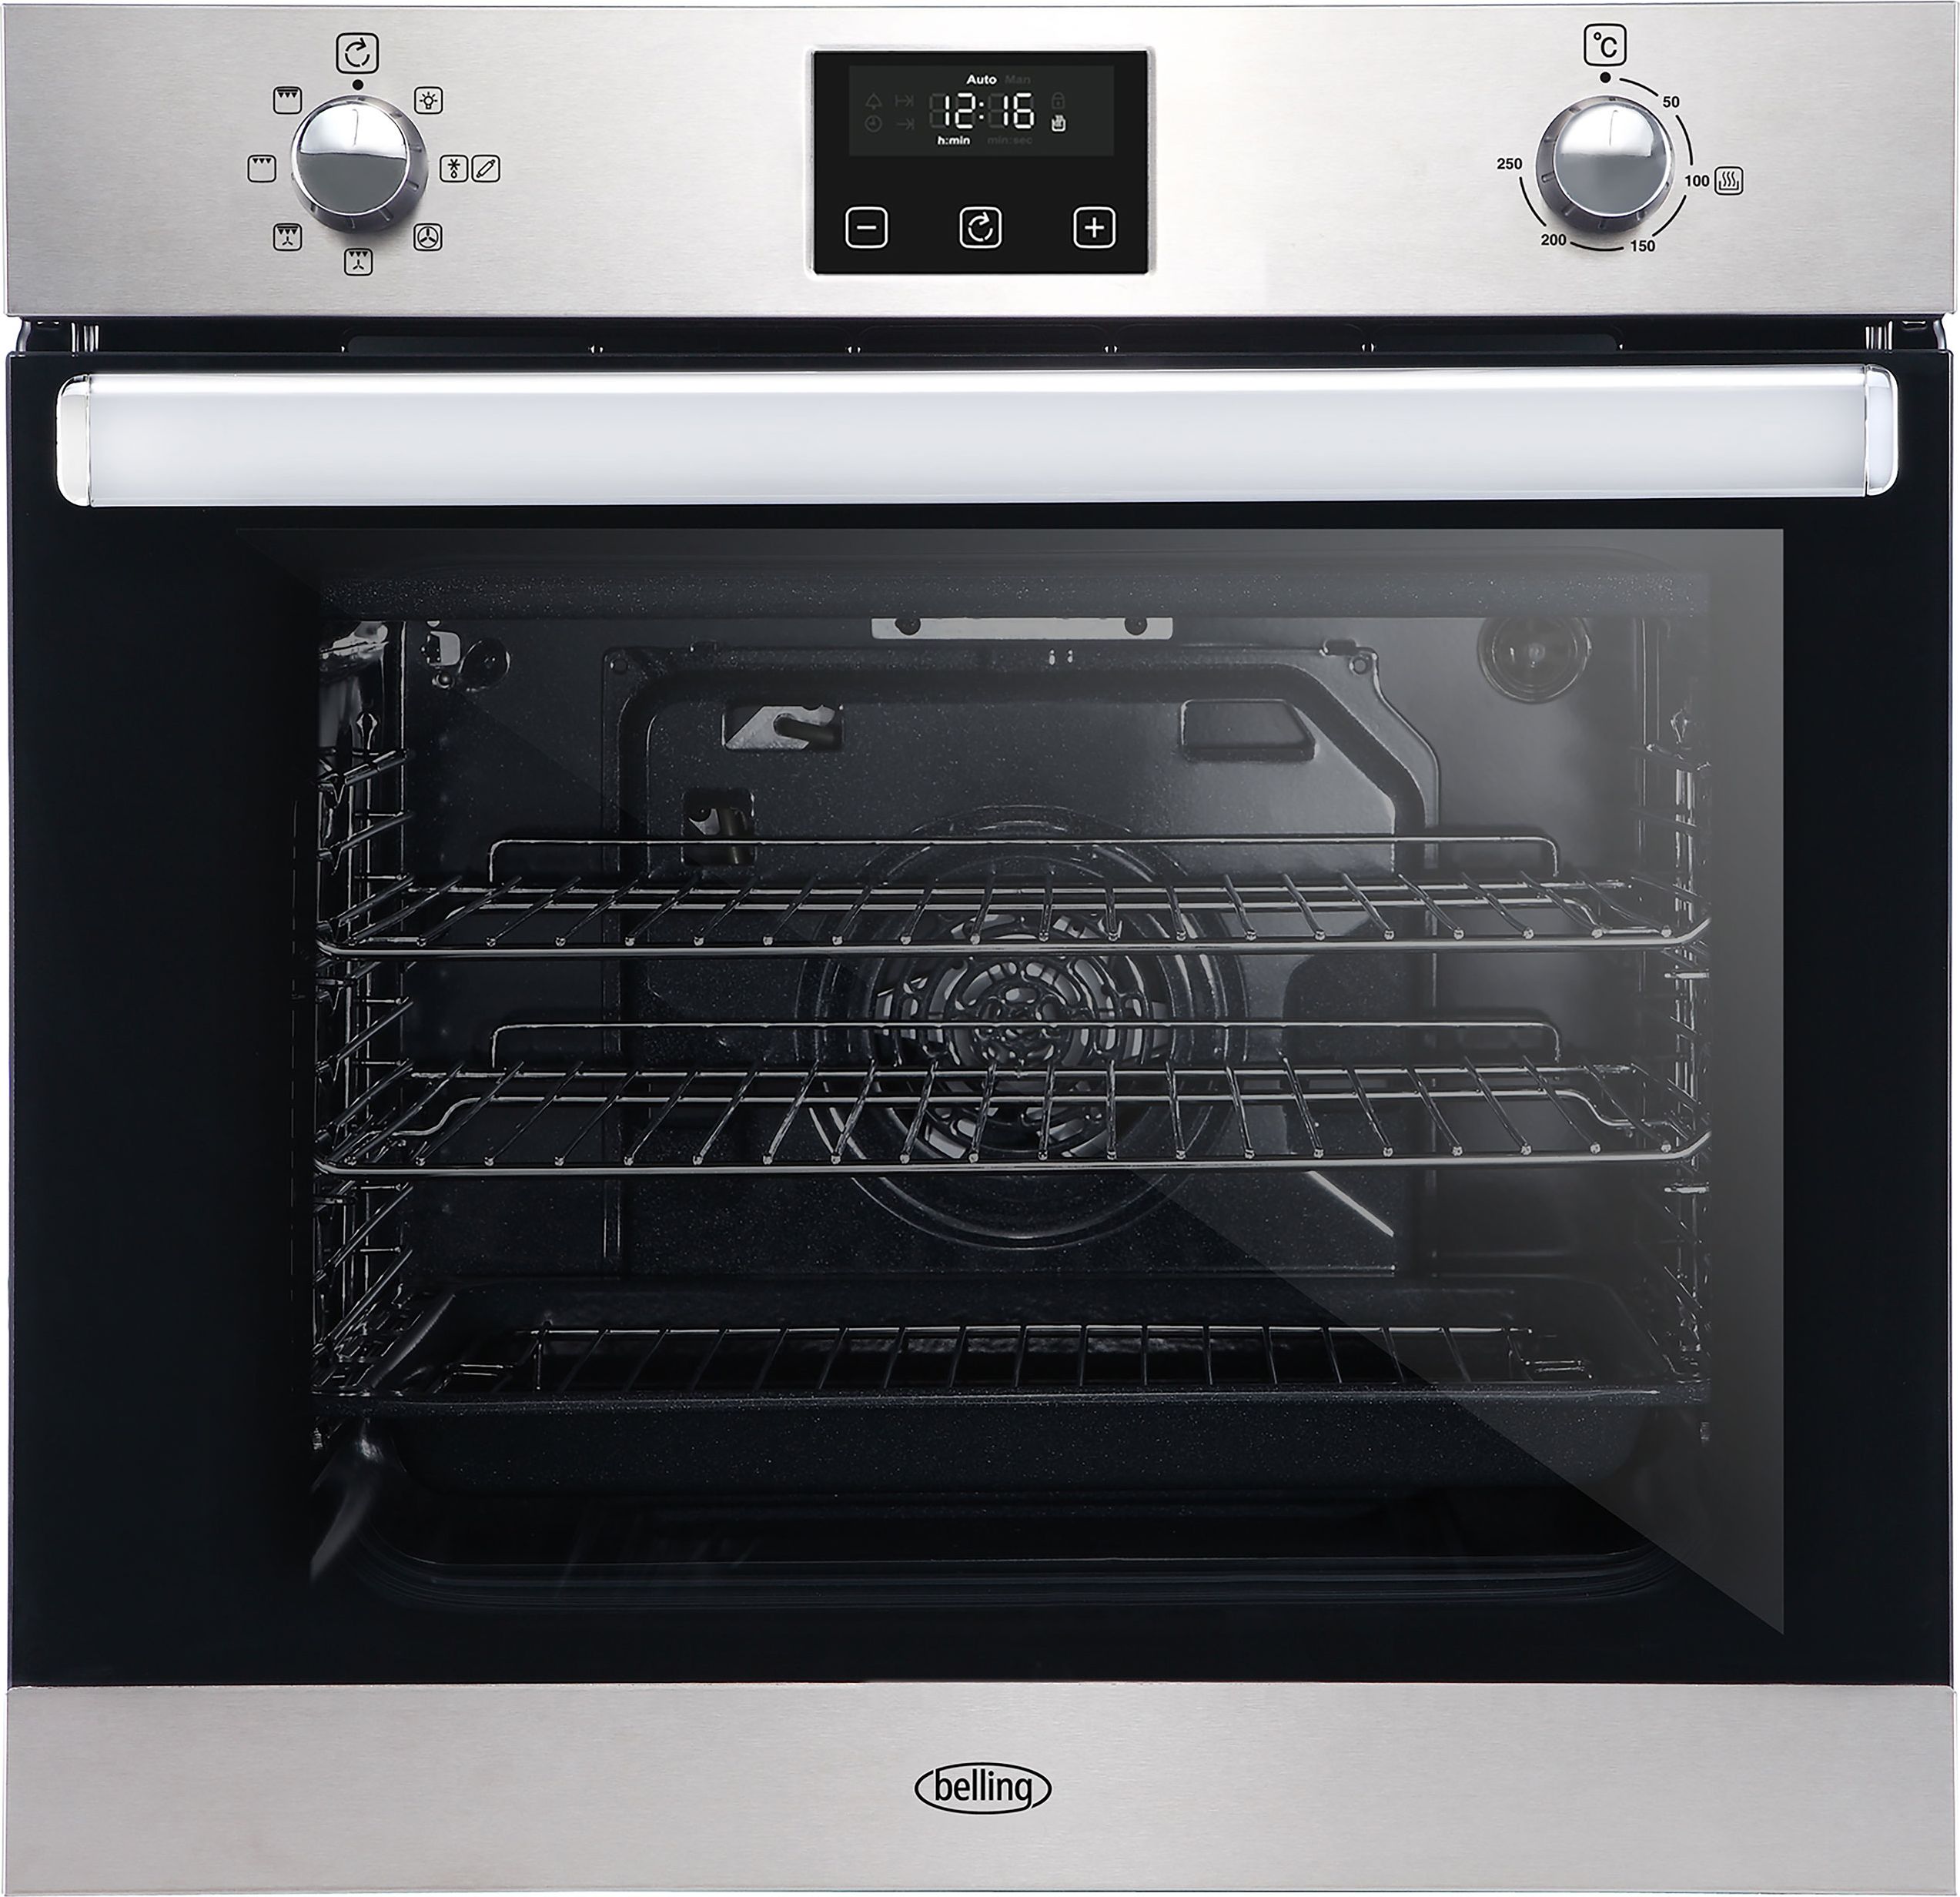 Belling BI602FP Built In Electric Single Oven - Stainless Steel - A Rated, Stainless Steel